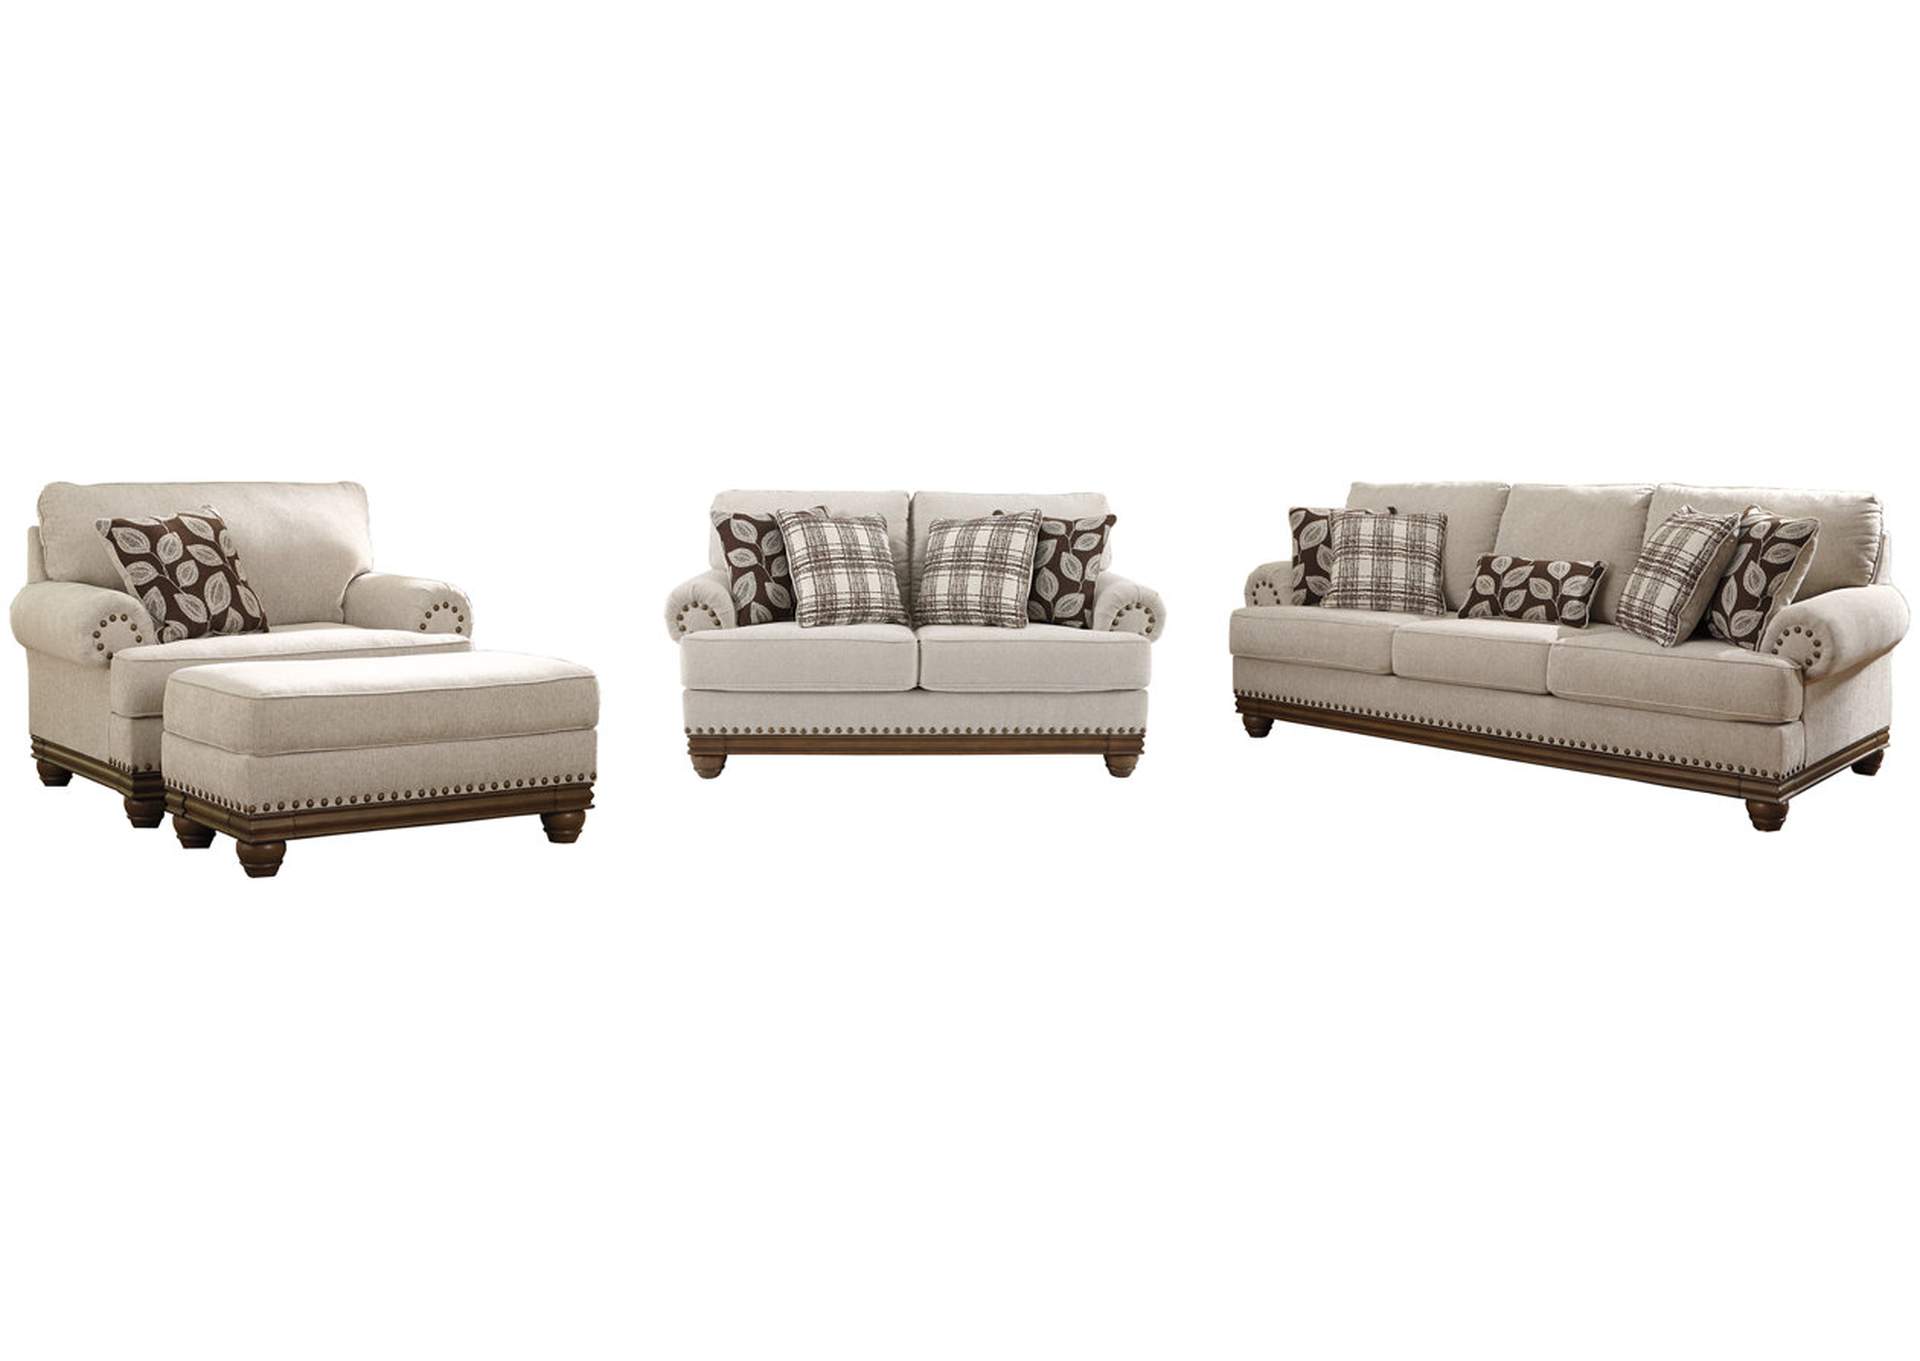 Harleson Sofa, Loveseat, Chair and Ottoman,Signature Design By Ashley